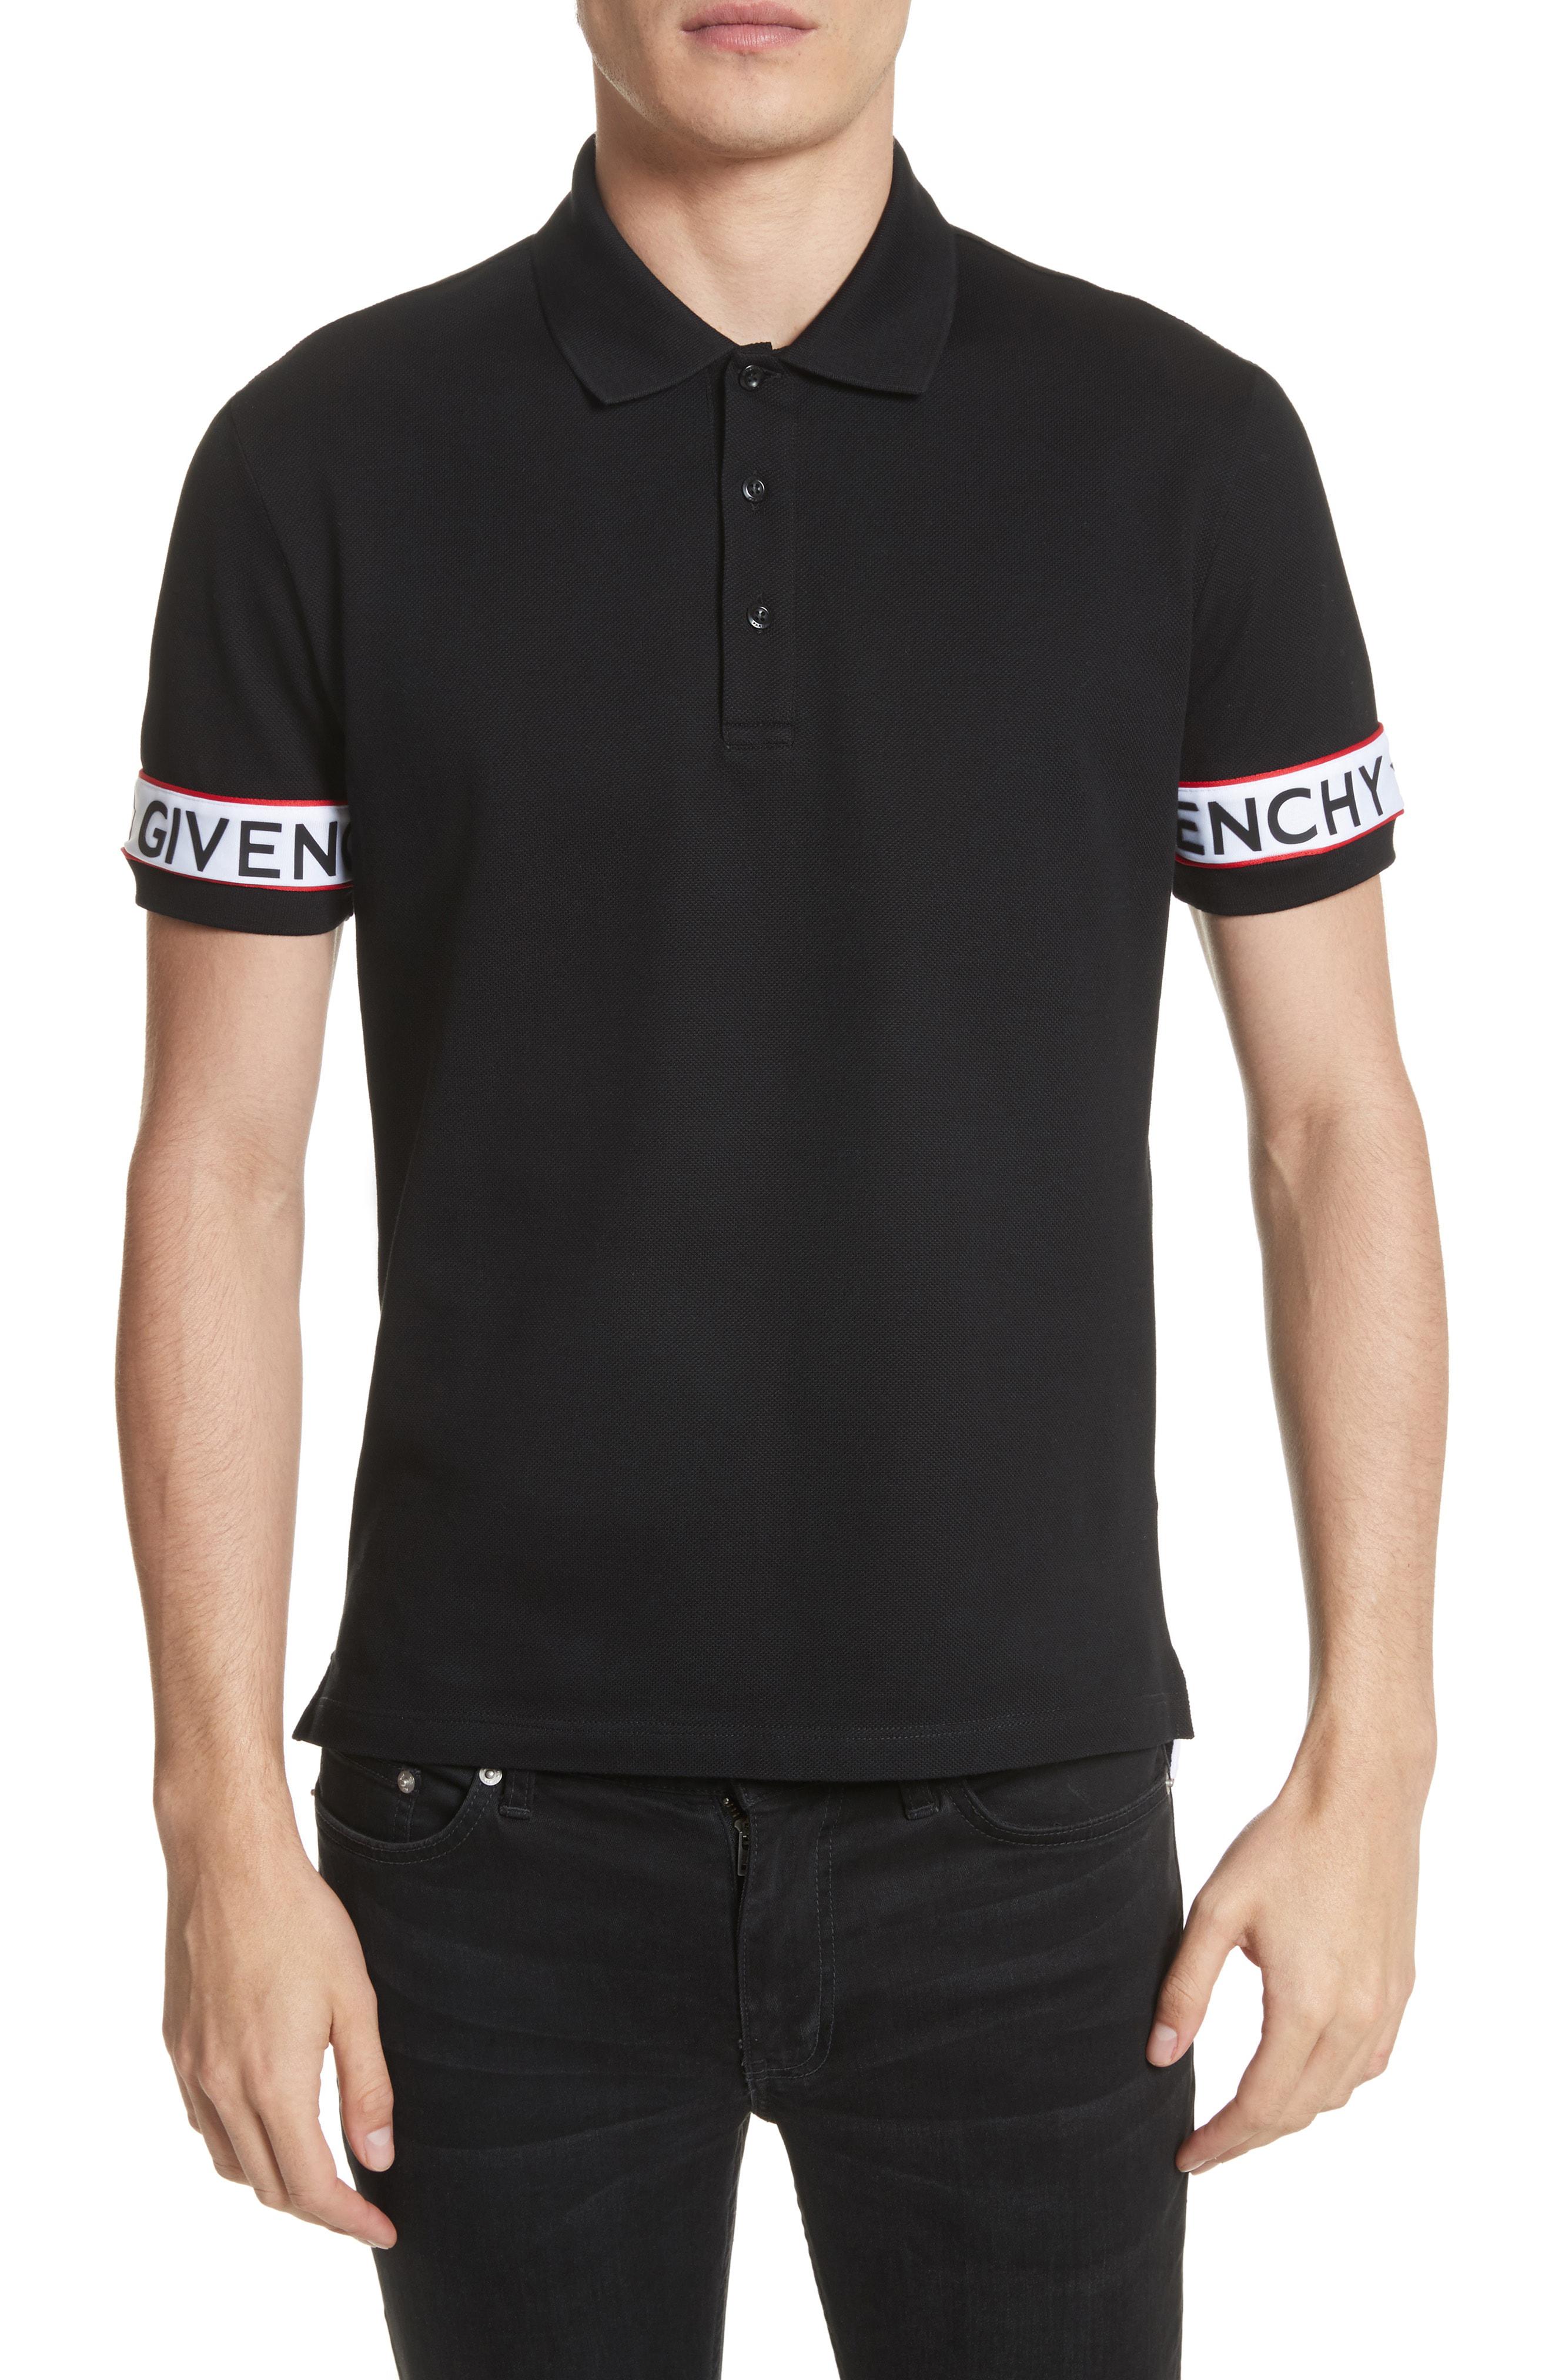 Lyst - Givenchy Givenchcy Logo Polo Shirt in Black for Men